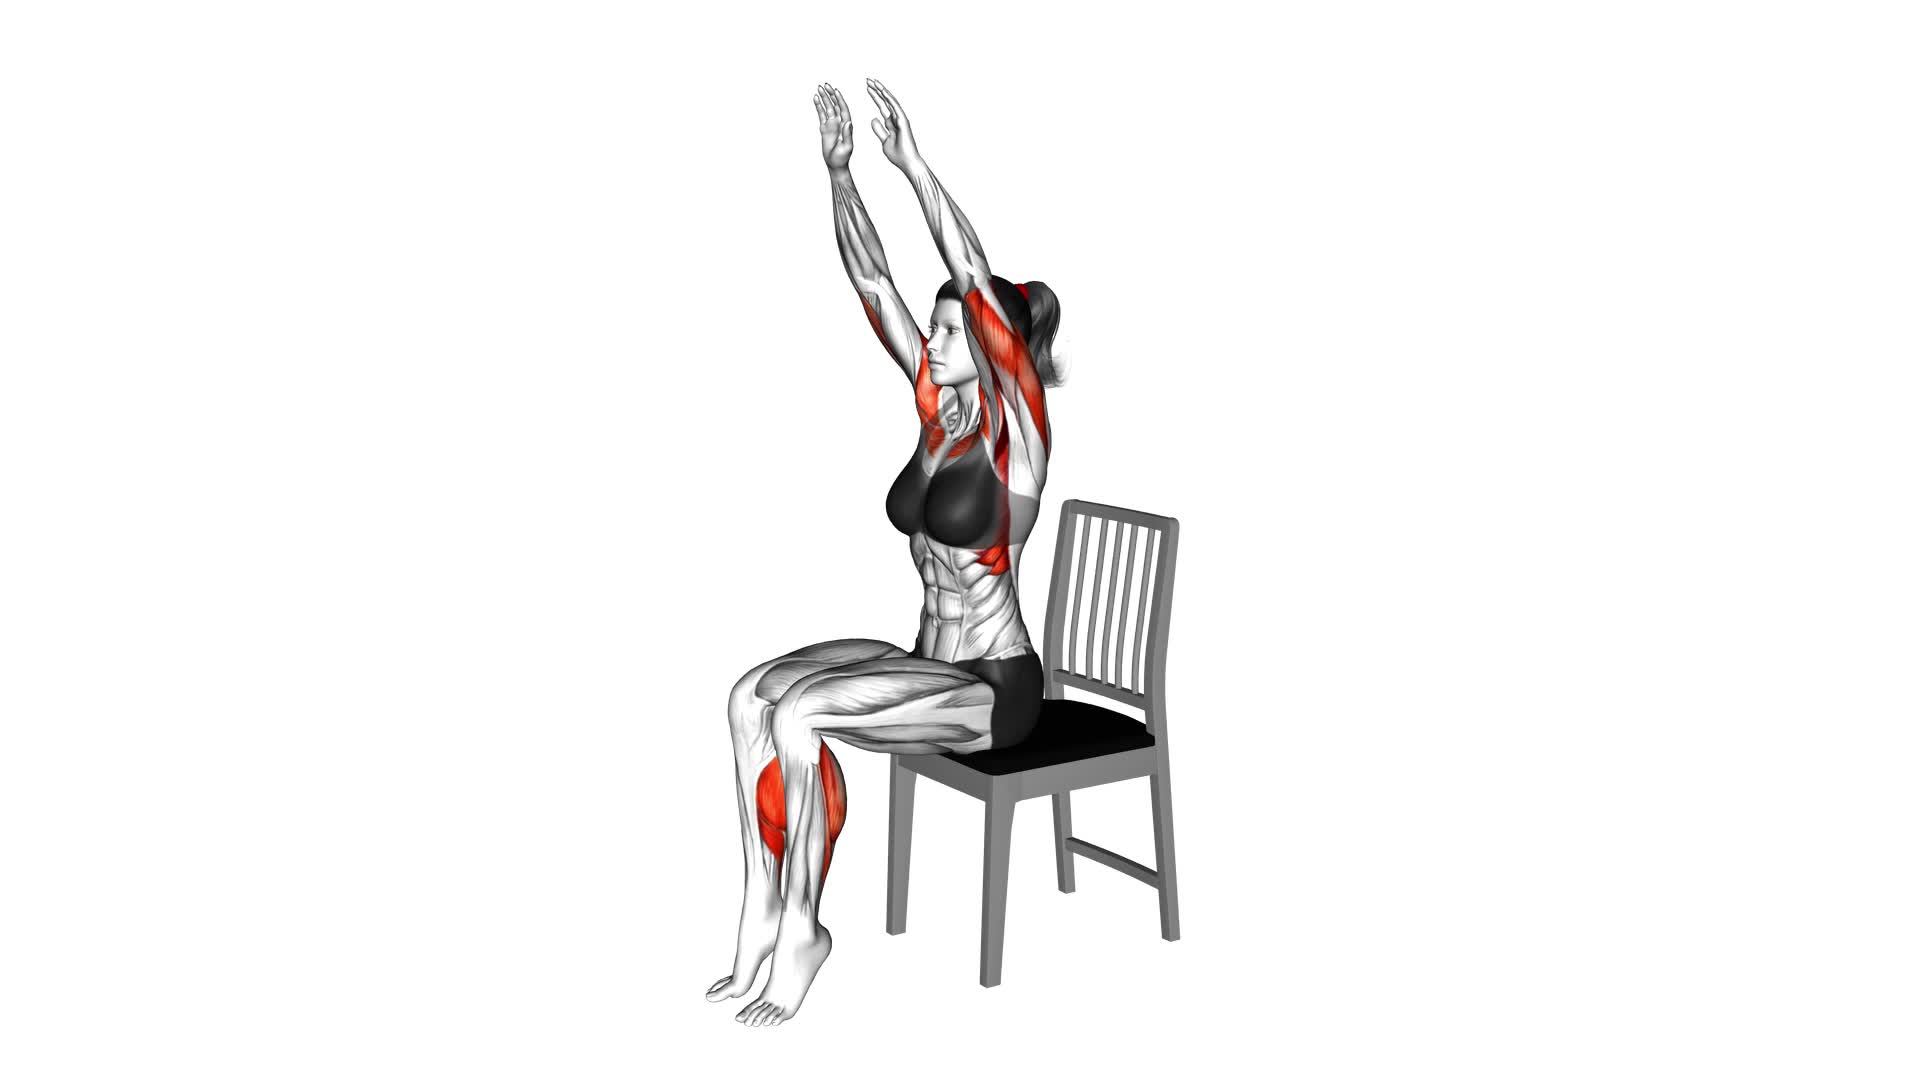 Sitting Incline Press Calf Raise on a Chair (female) - Video Exercise Guide & Tips